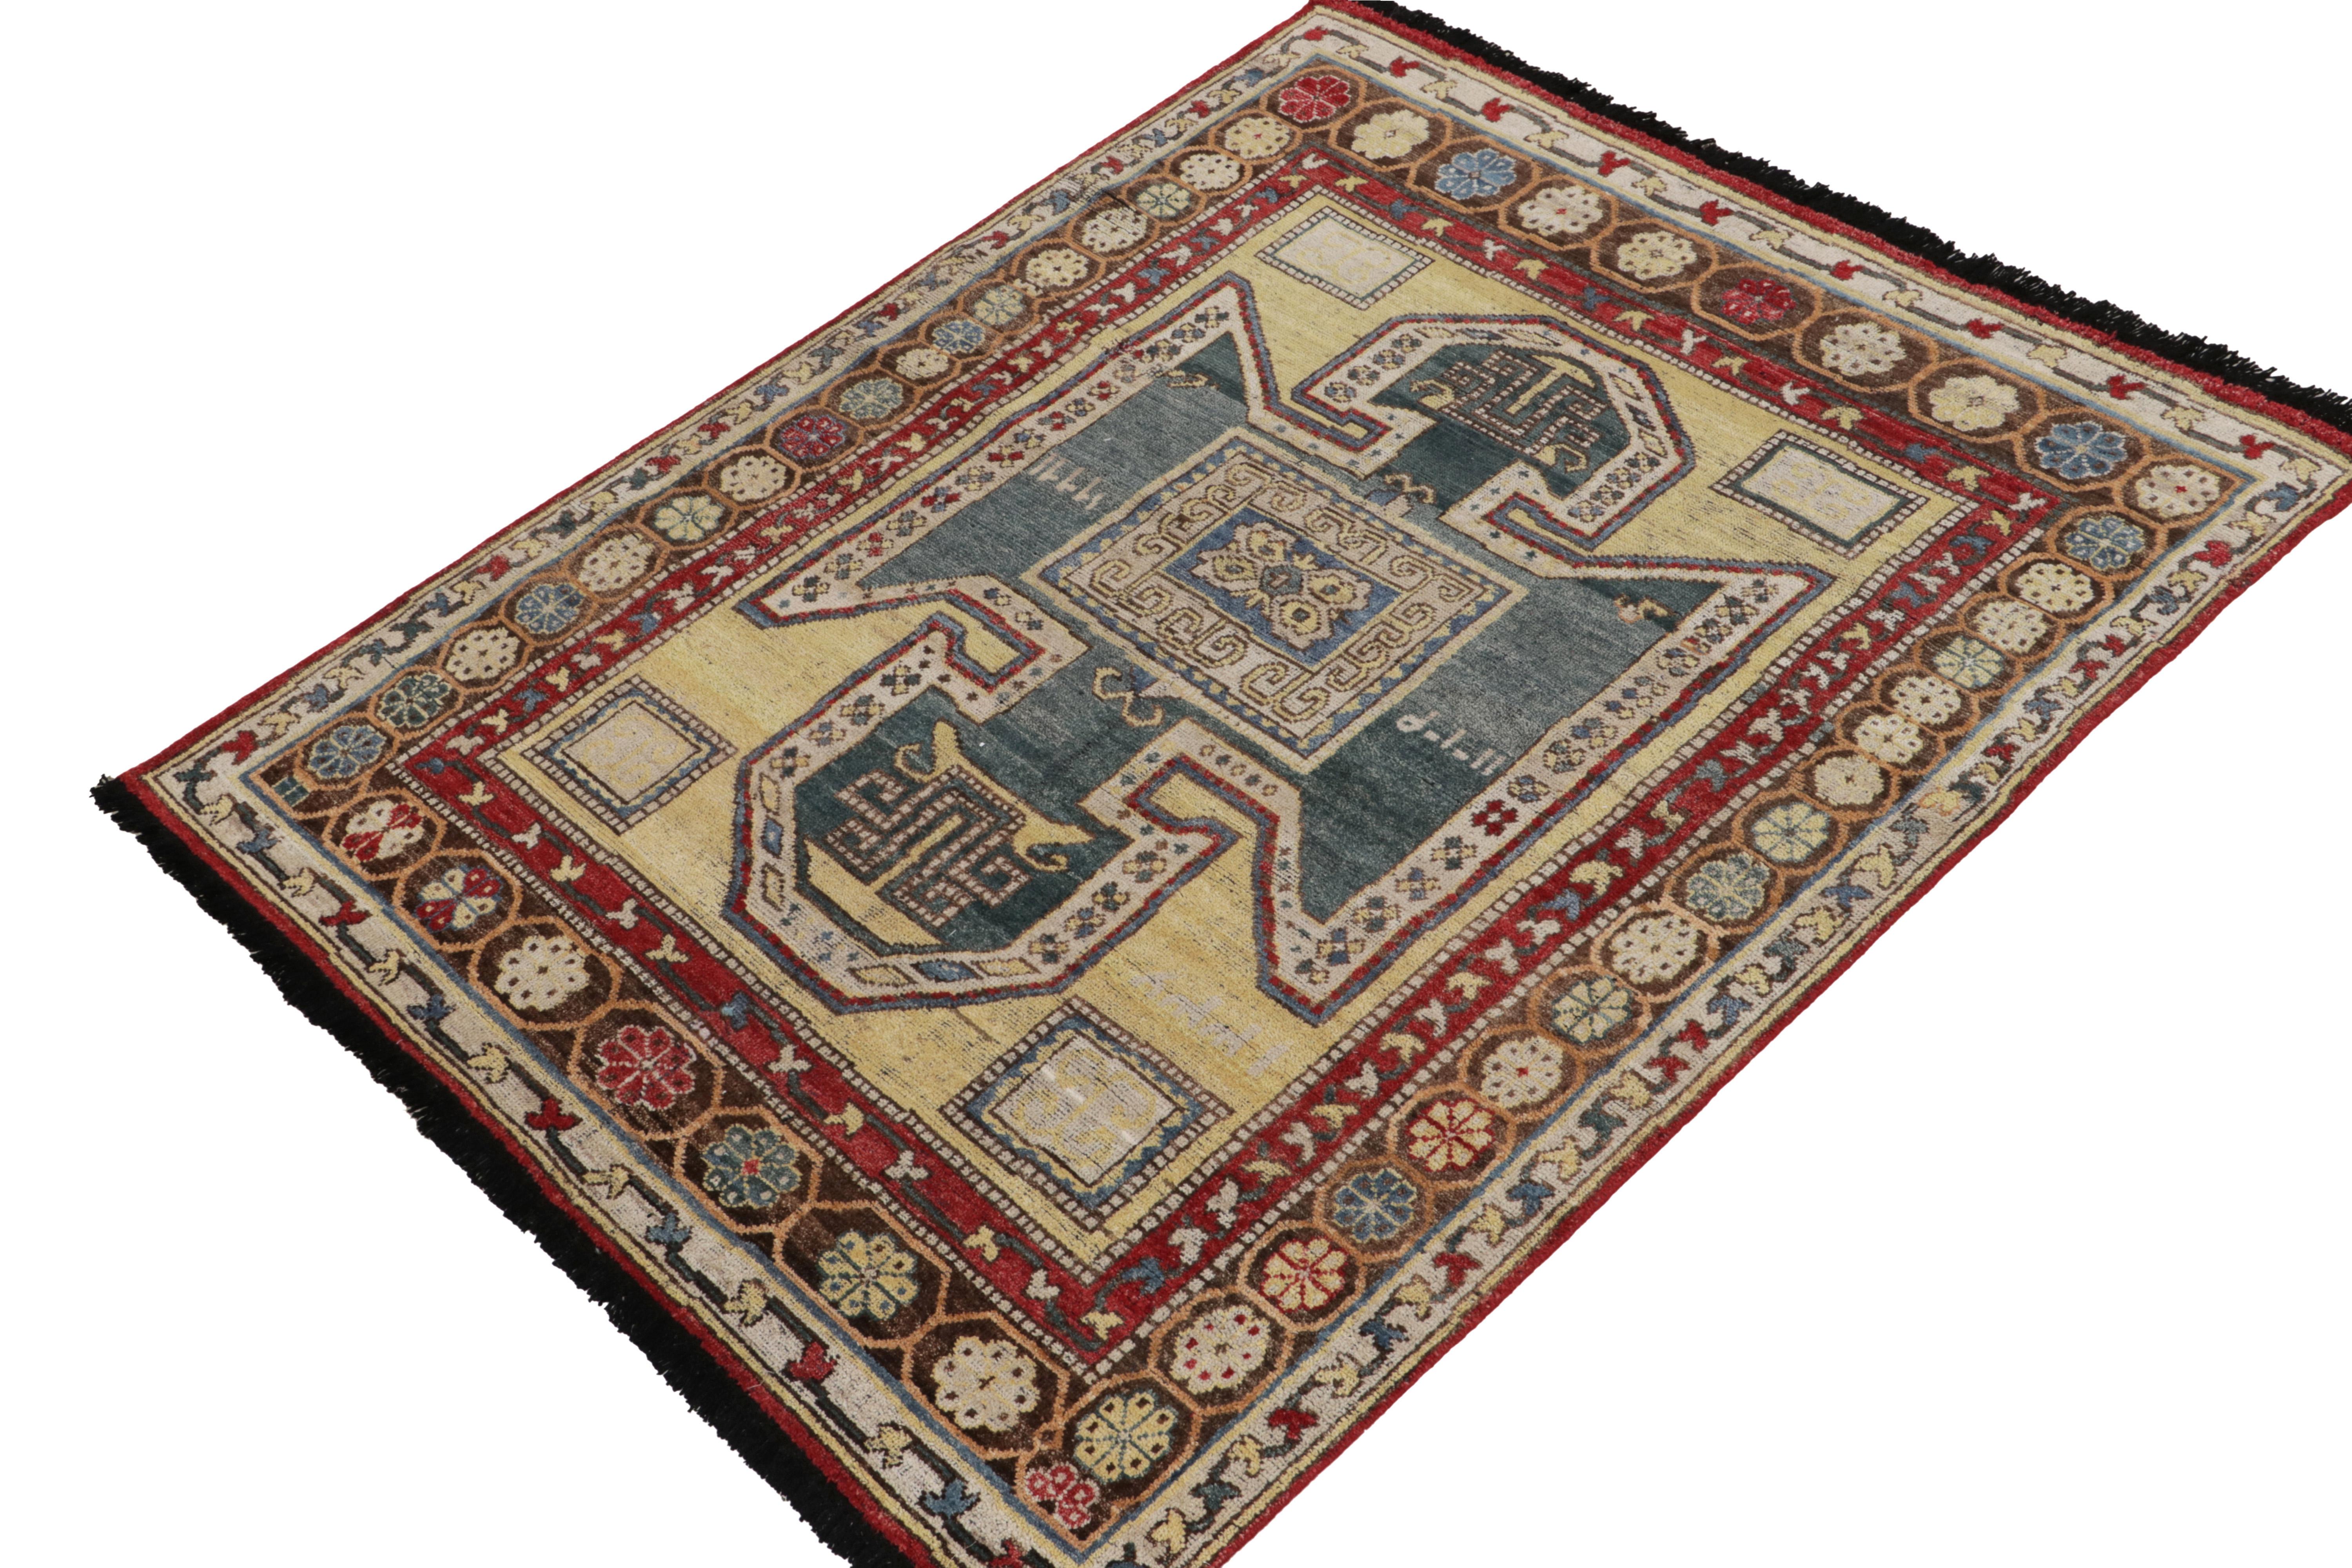 Indian Rug & Kilim's Tribal Style Rug in Blue, Red, Beige-Brown Geometric Pattern For Sale